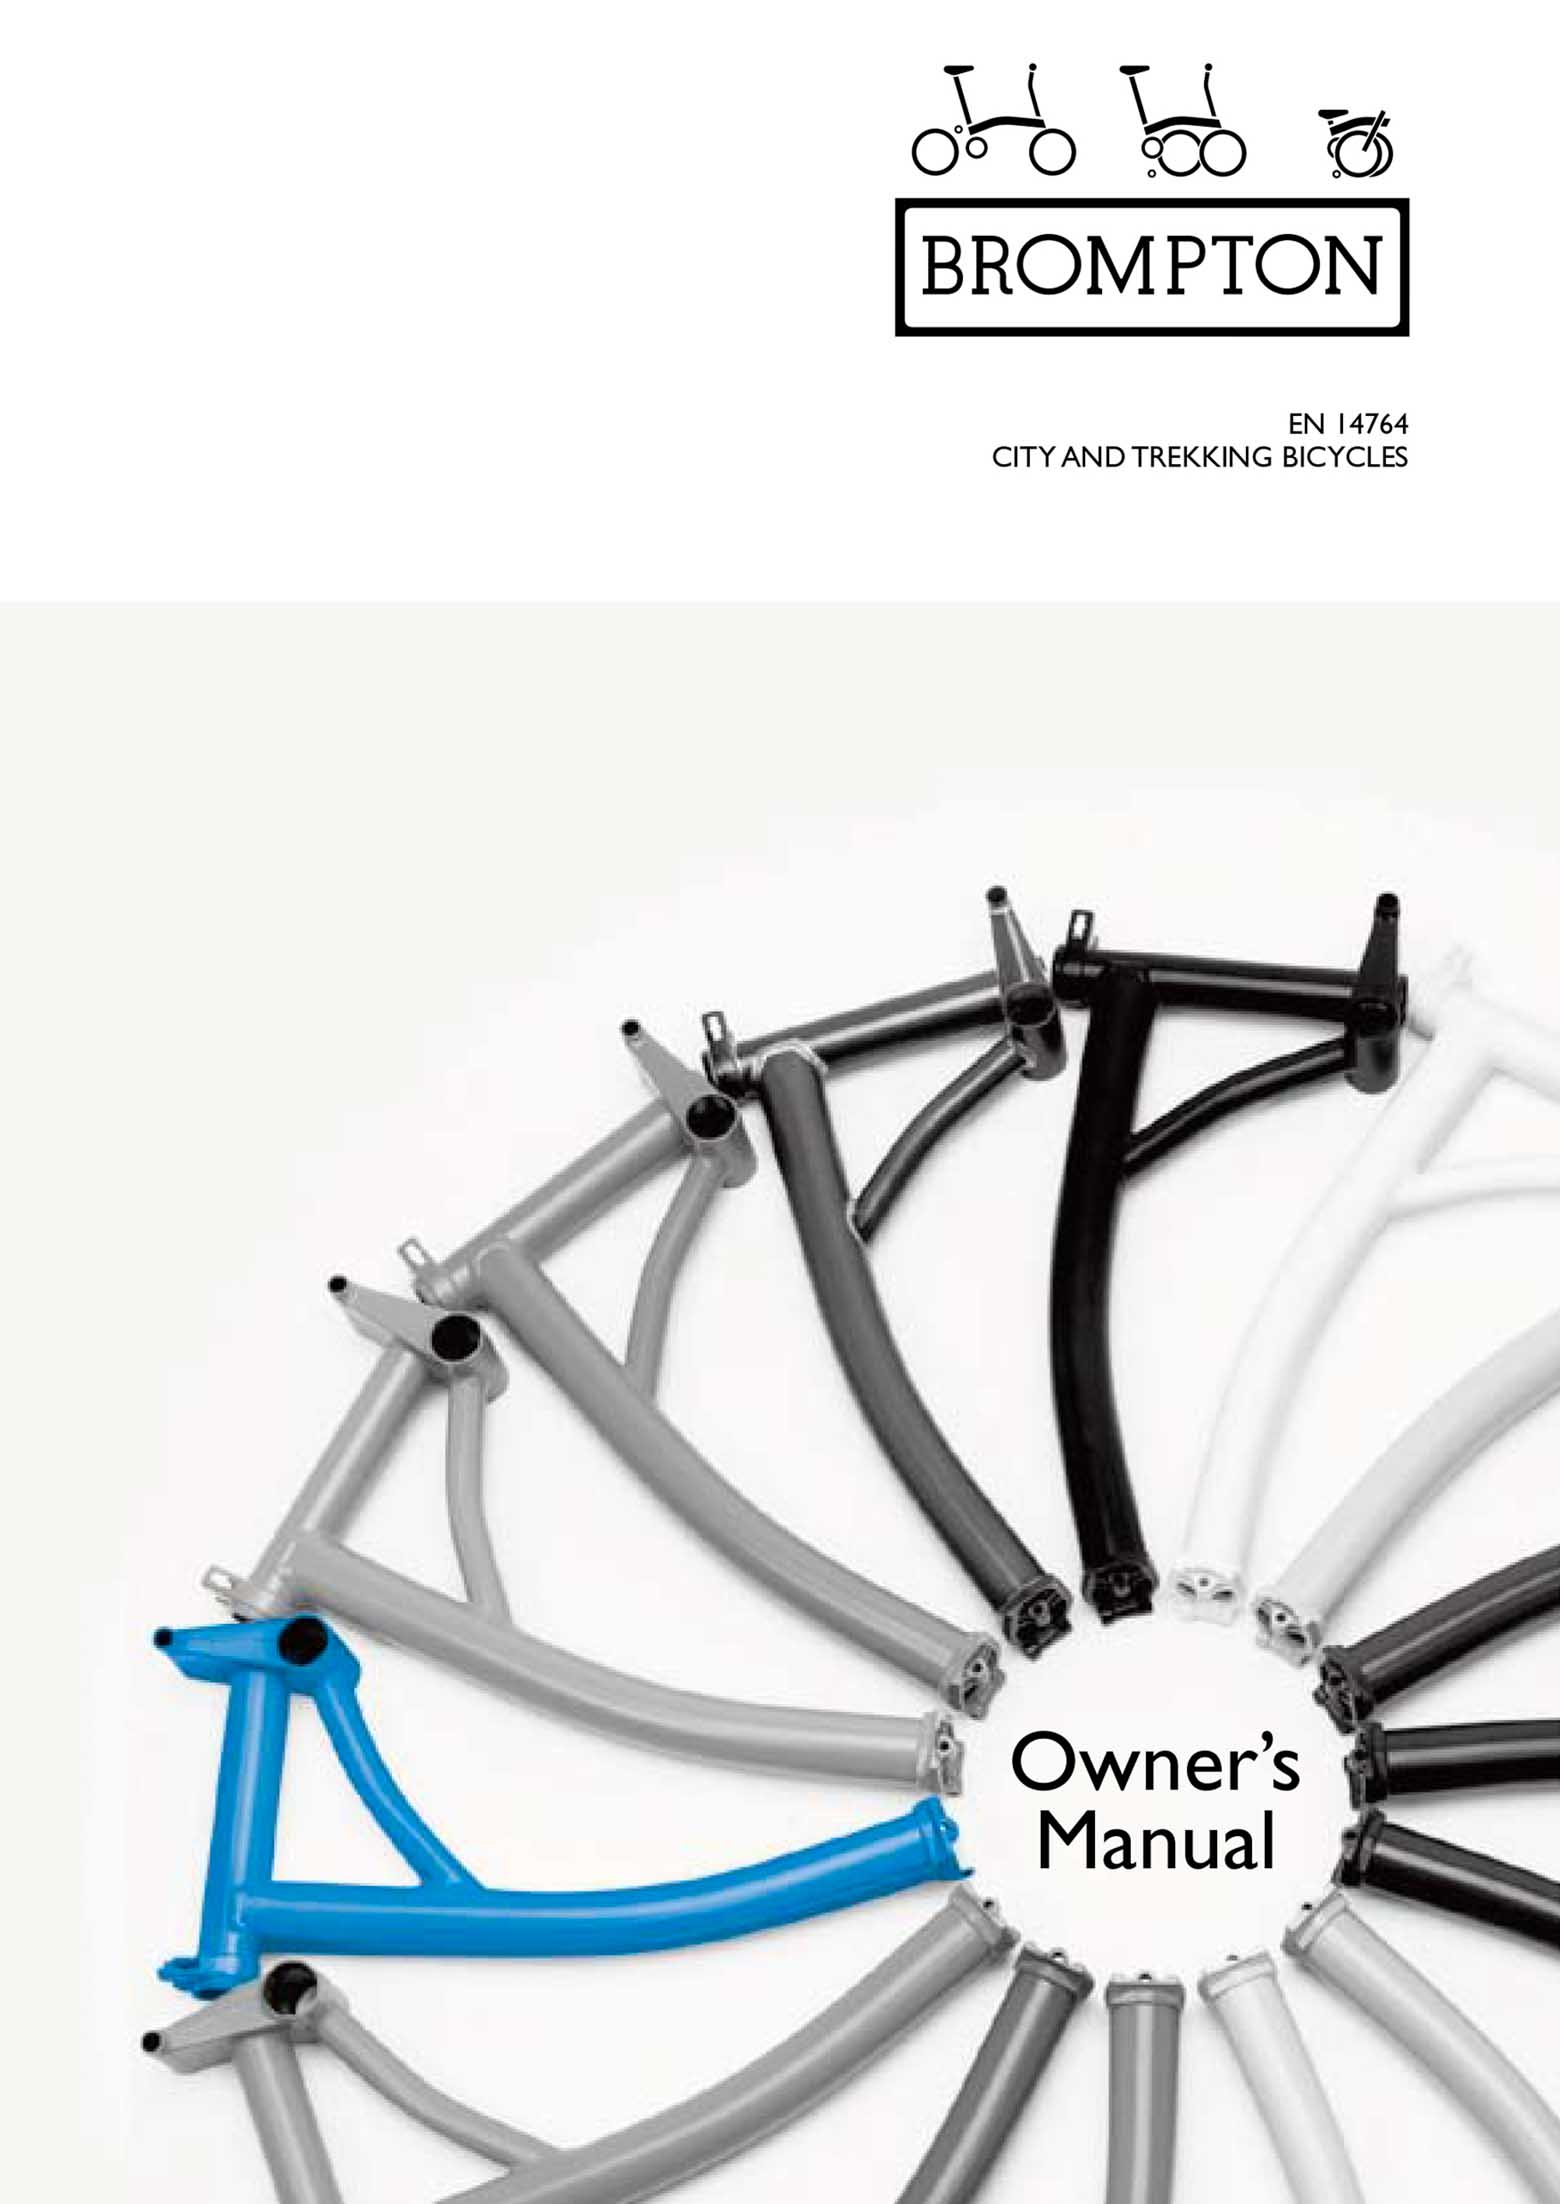 Brompton Bicycle - Owners Manual 2011 front cover main image